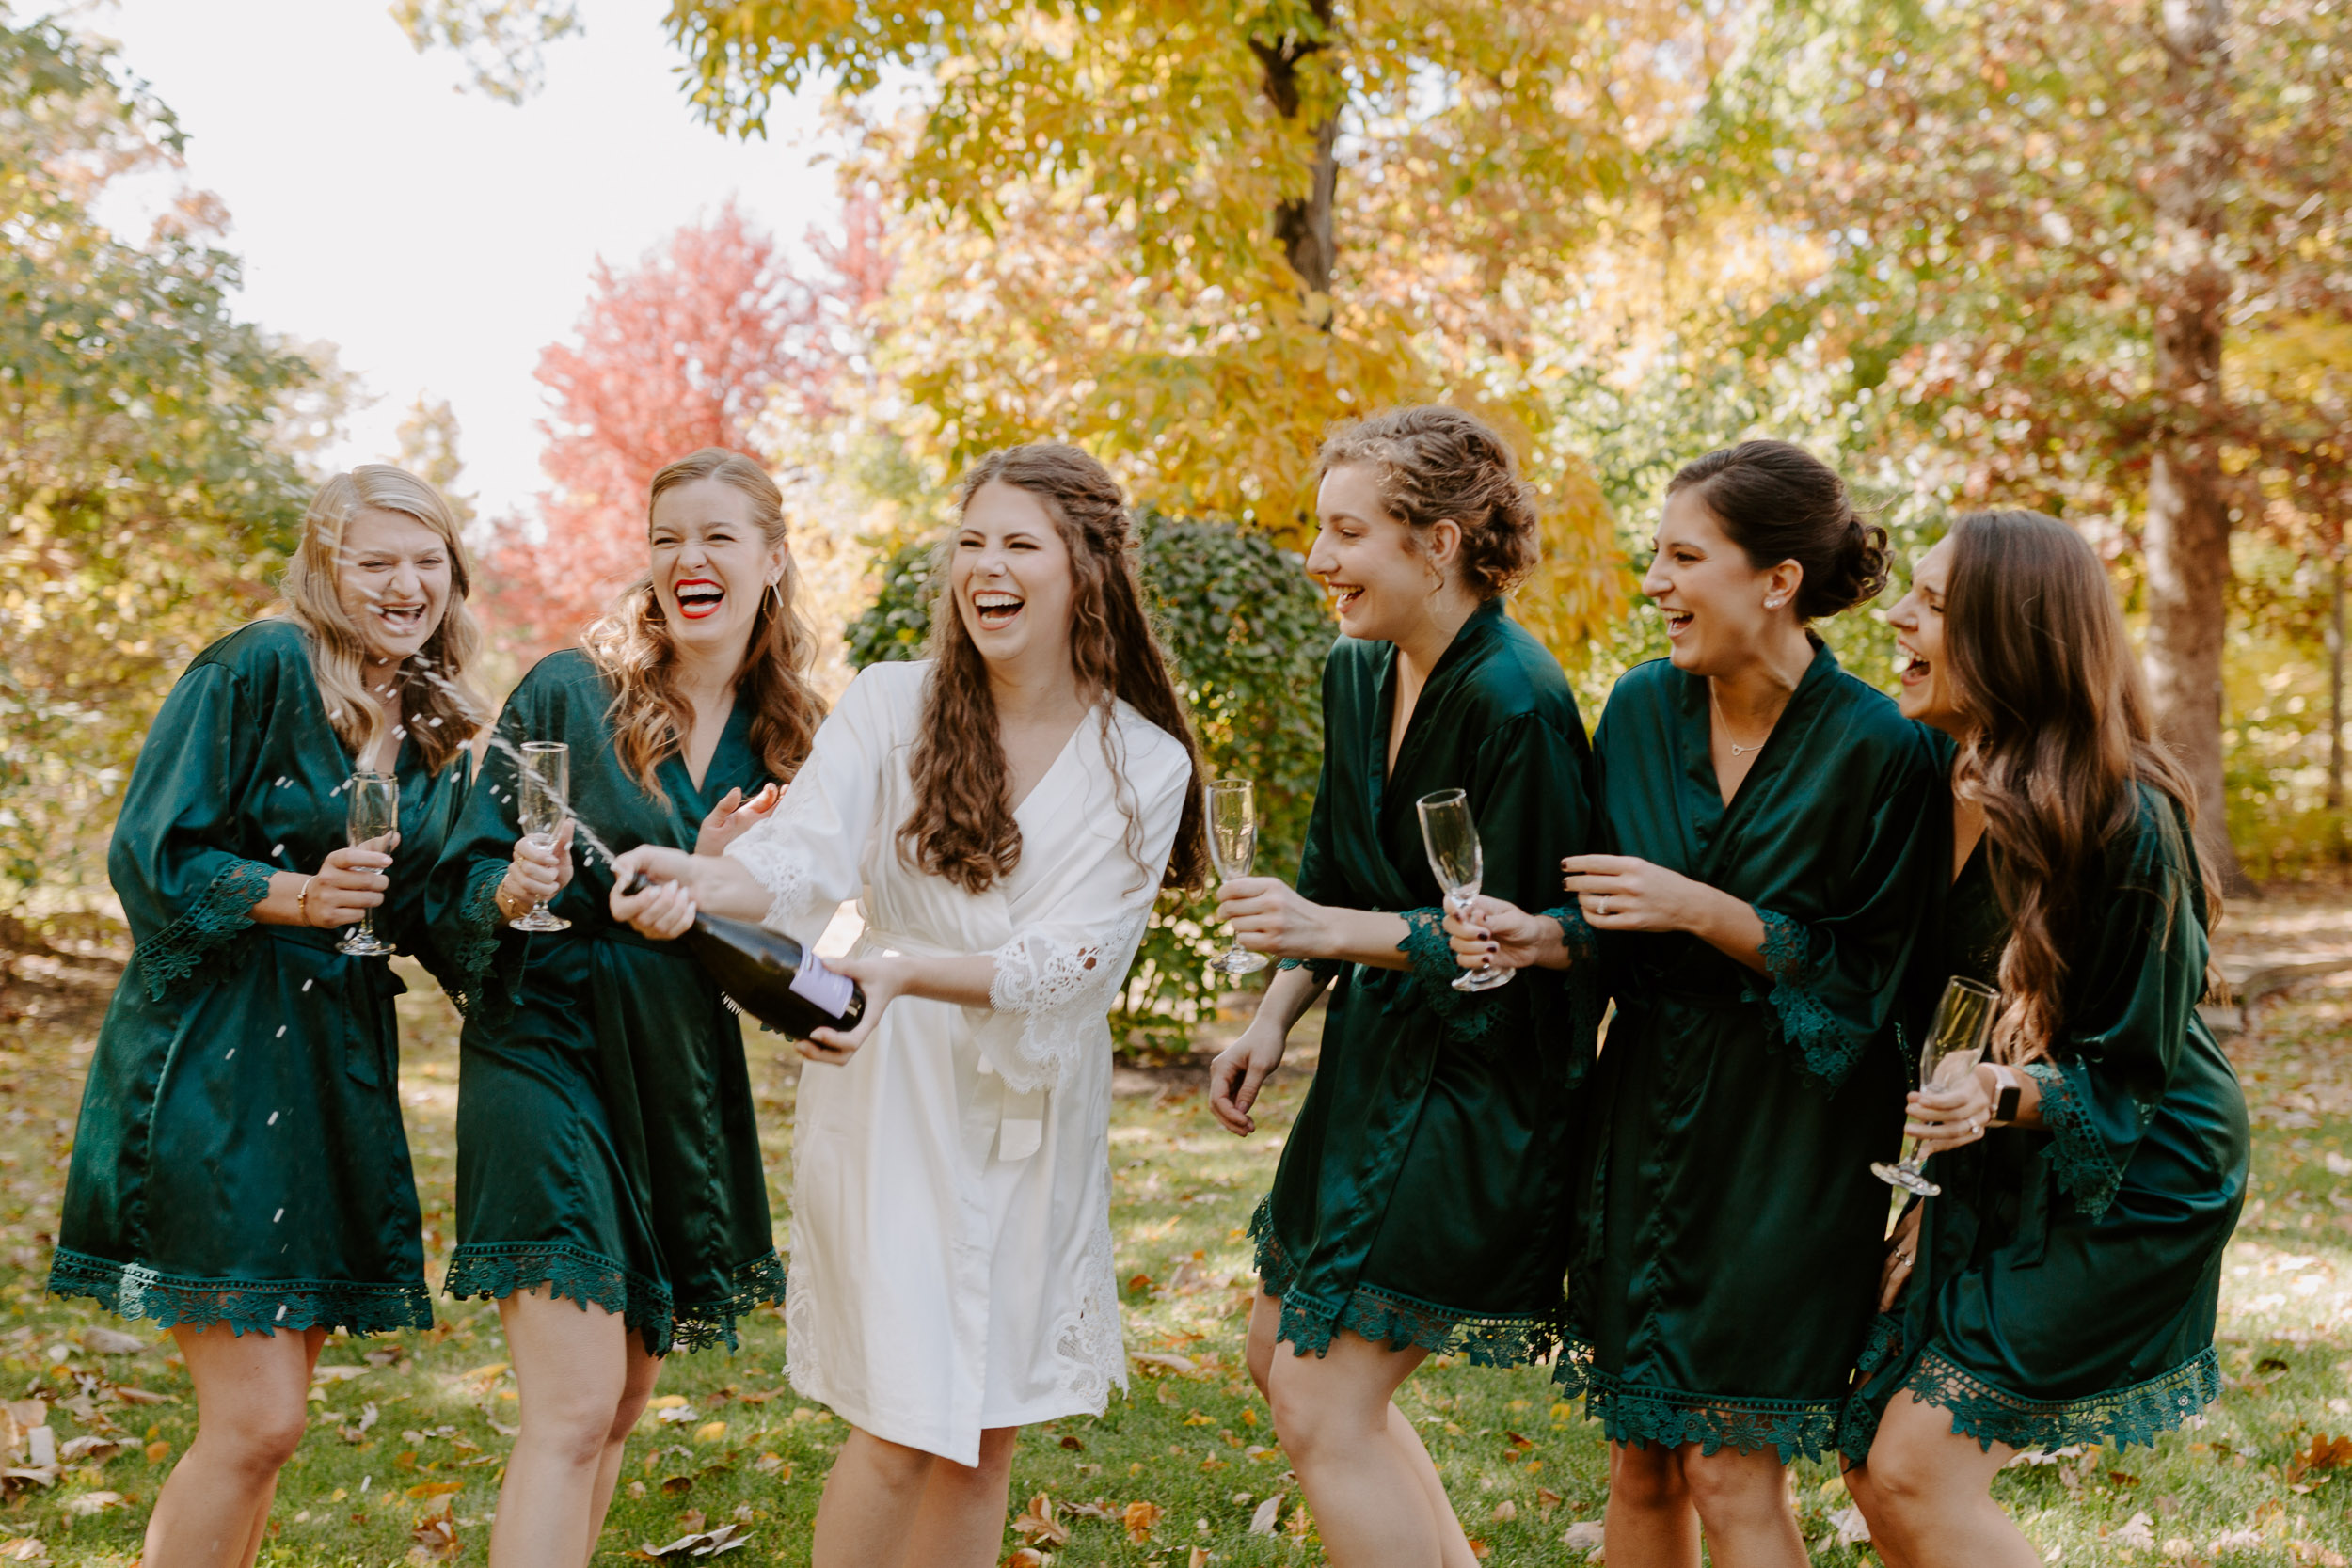 Bride popping champagne with bridesmaids wearing matching green robes